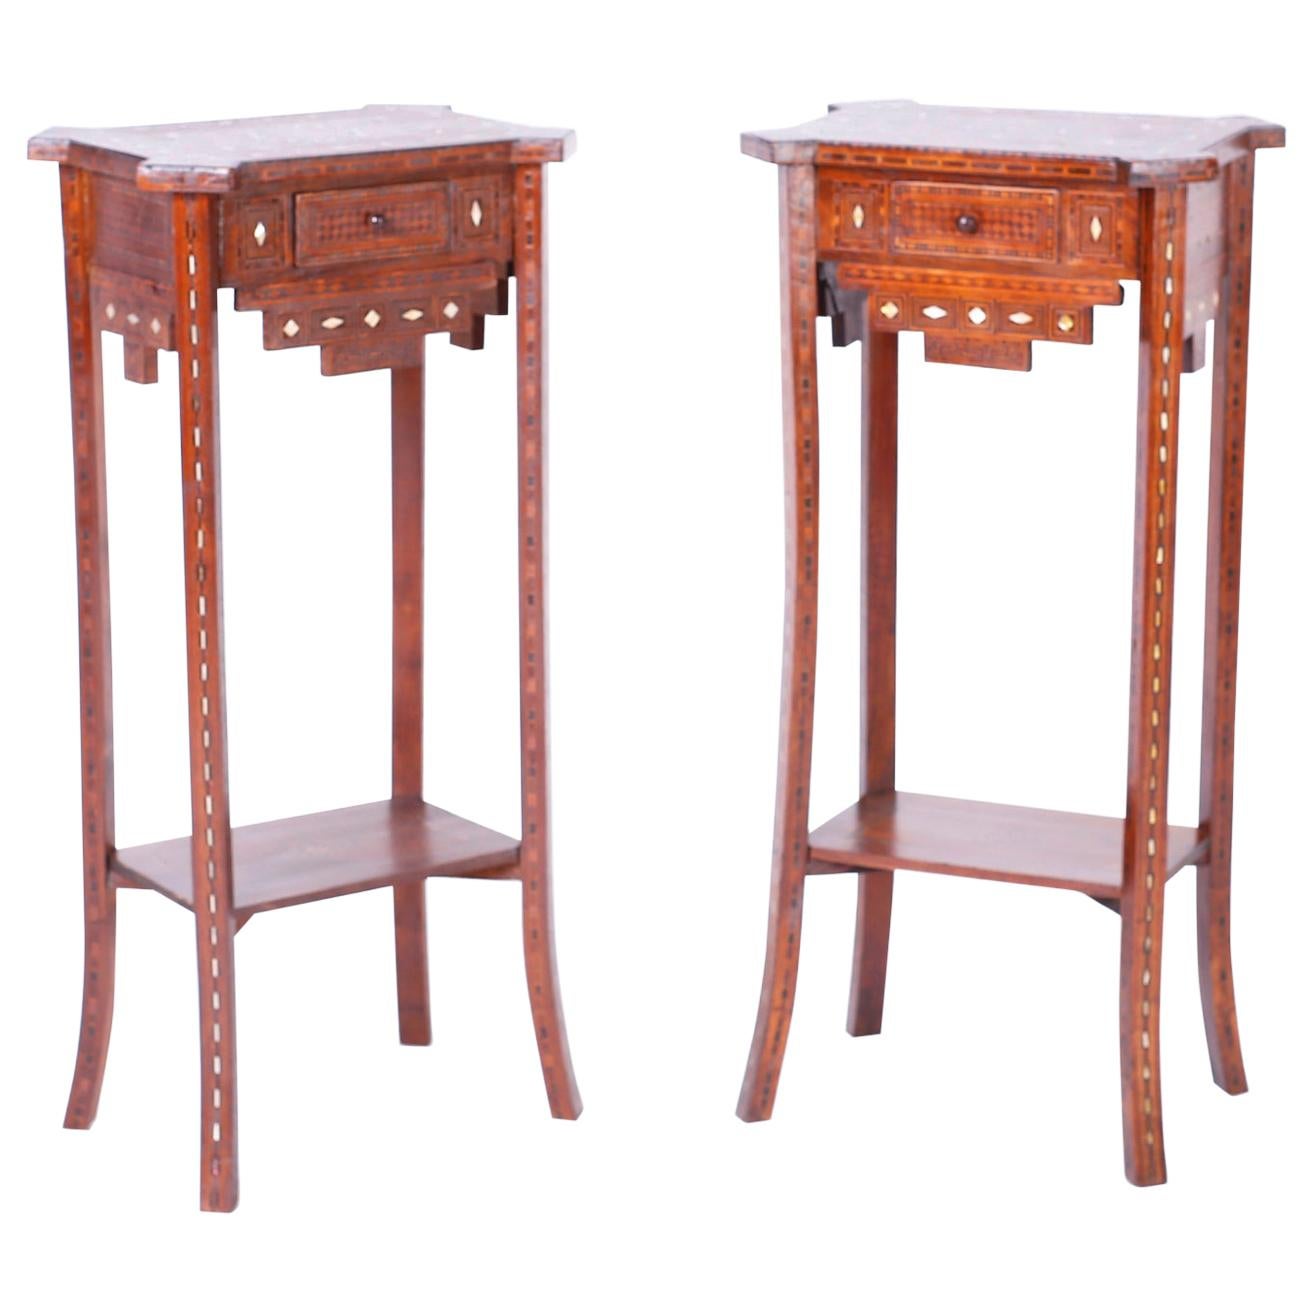 Pair of Antique Syrian Inlaid Stands or Tables